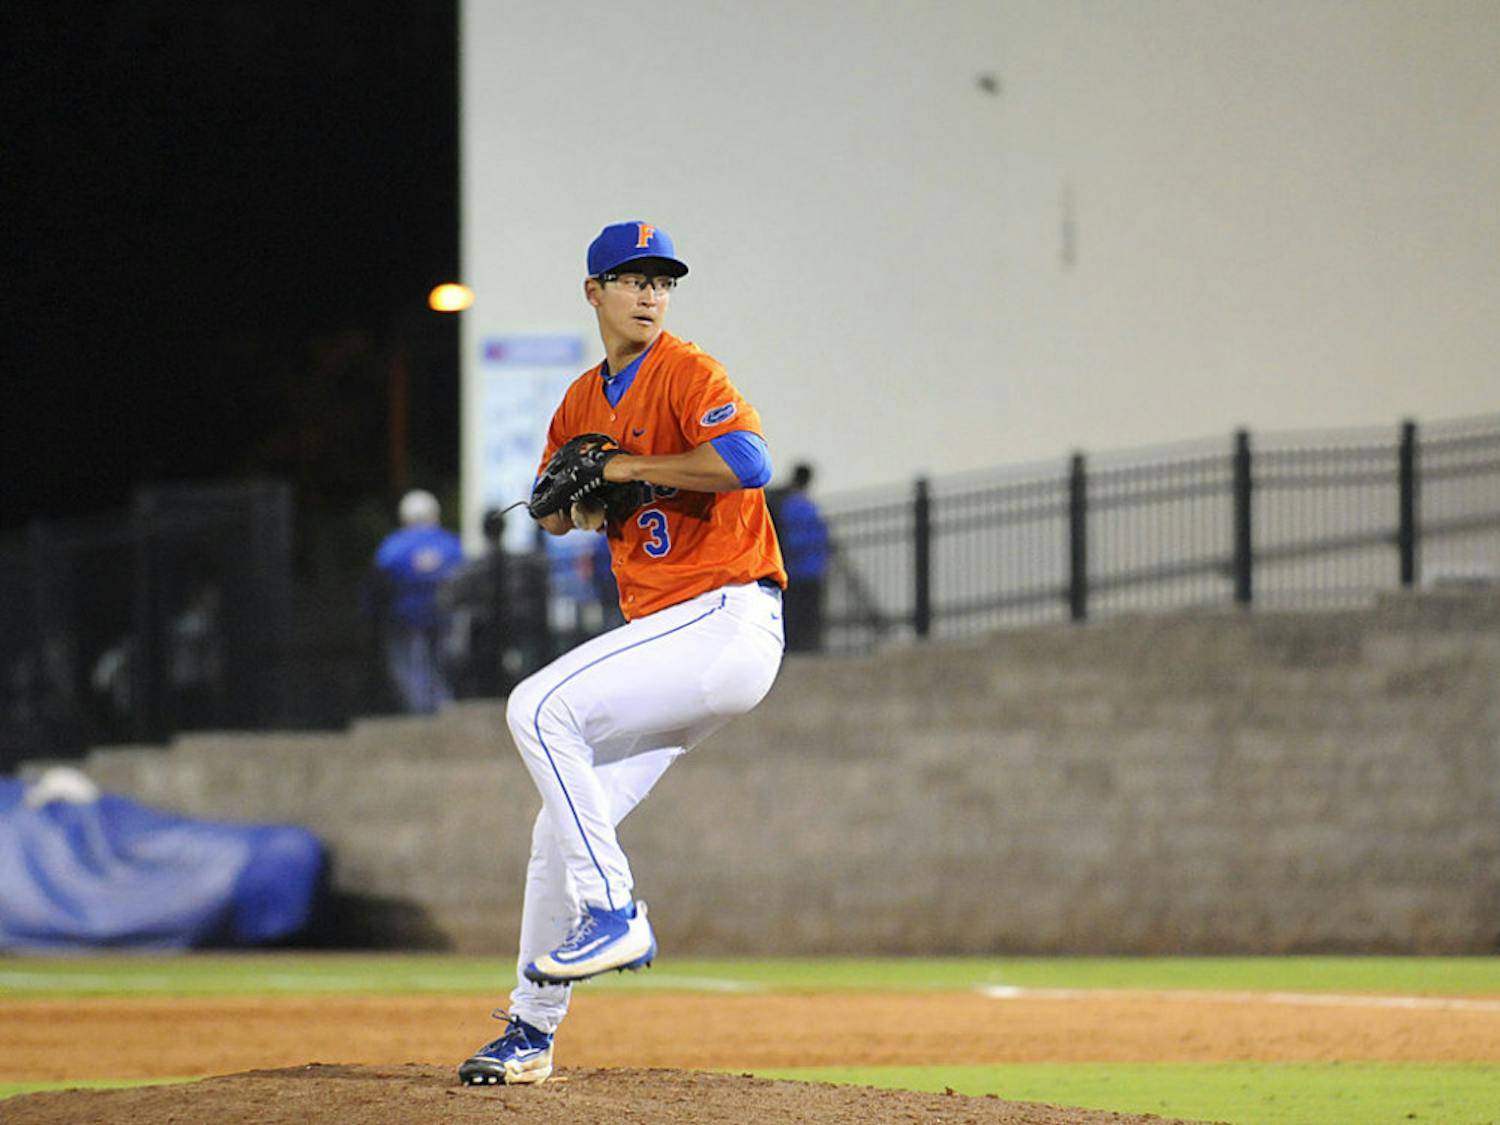 Dane Dunning pitches during Florida's 7-2 win over Jacksonville on April 5, 2016, at McKethan Stadium.